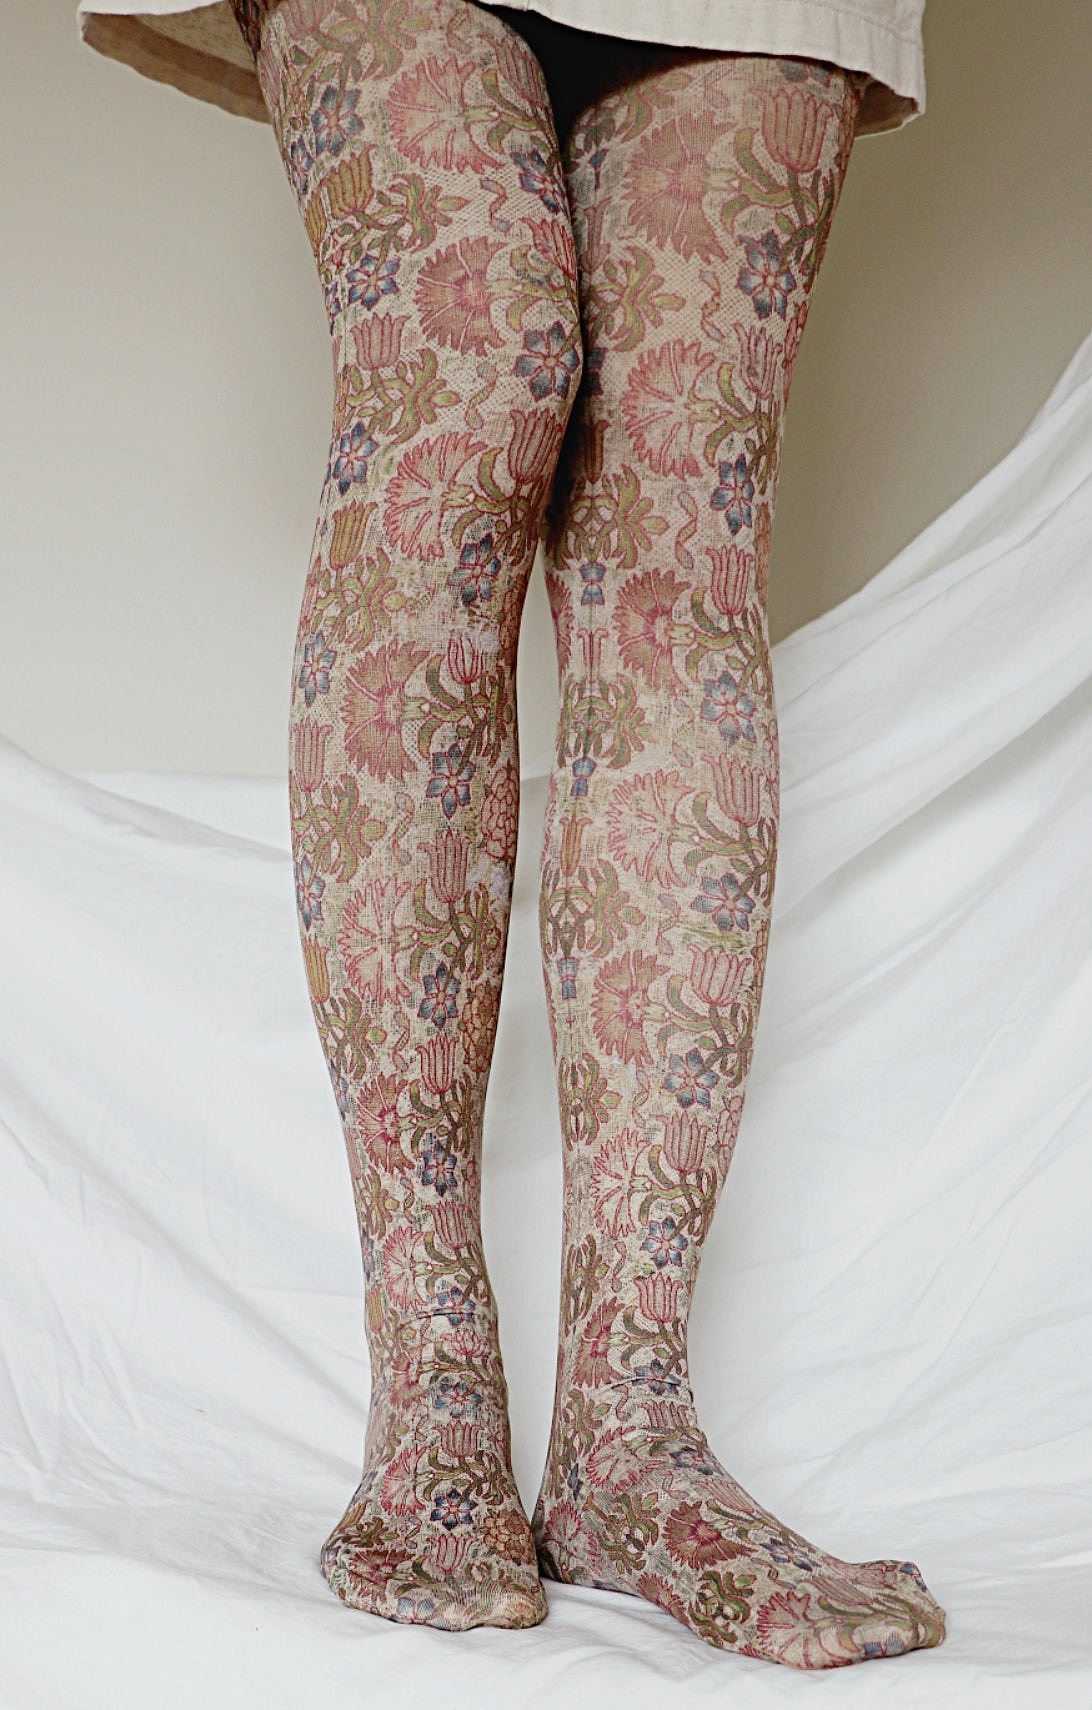 TABBISOCKS brand The Art Institute of Chicago Printed Tights, reddish brownish overall in color.